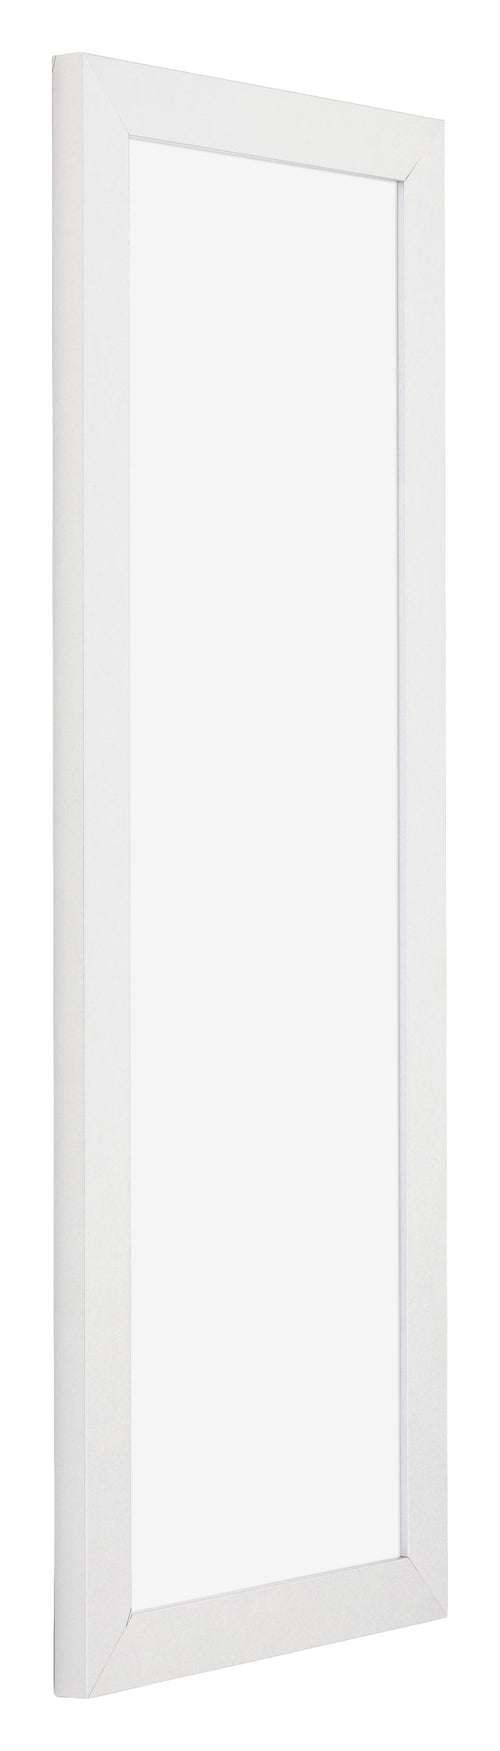 Mura MDF Photo Frame 20x60 White High Gloss Front Oblique | Yourdecoration.co.uk